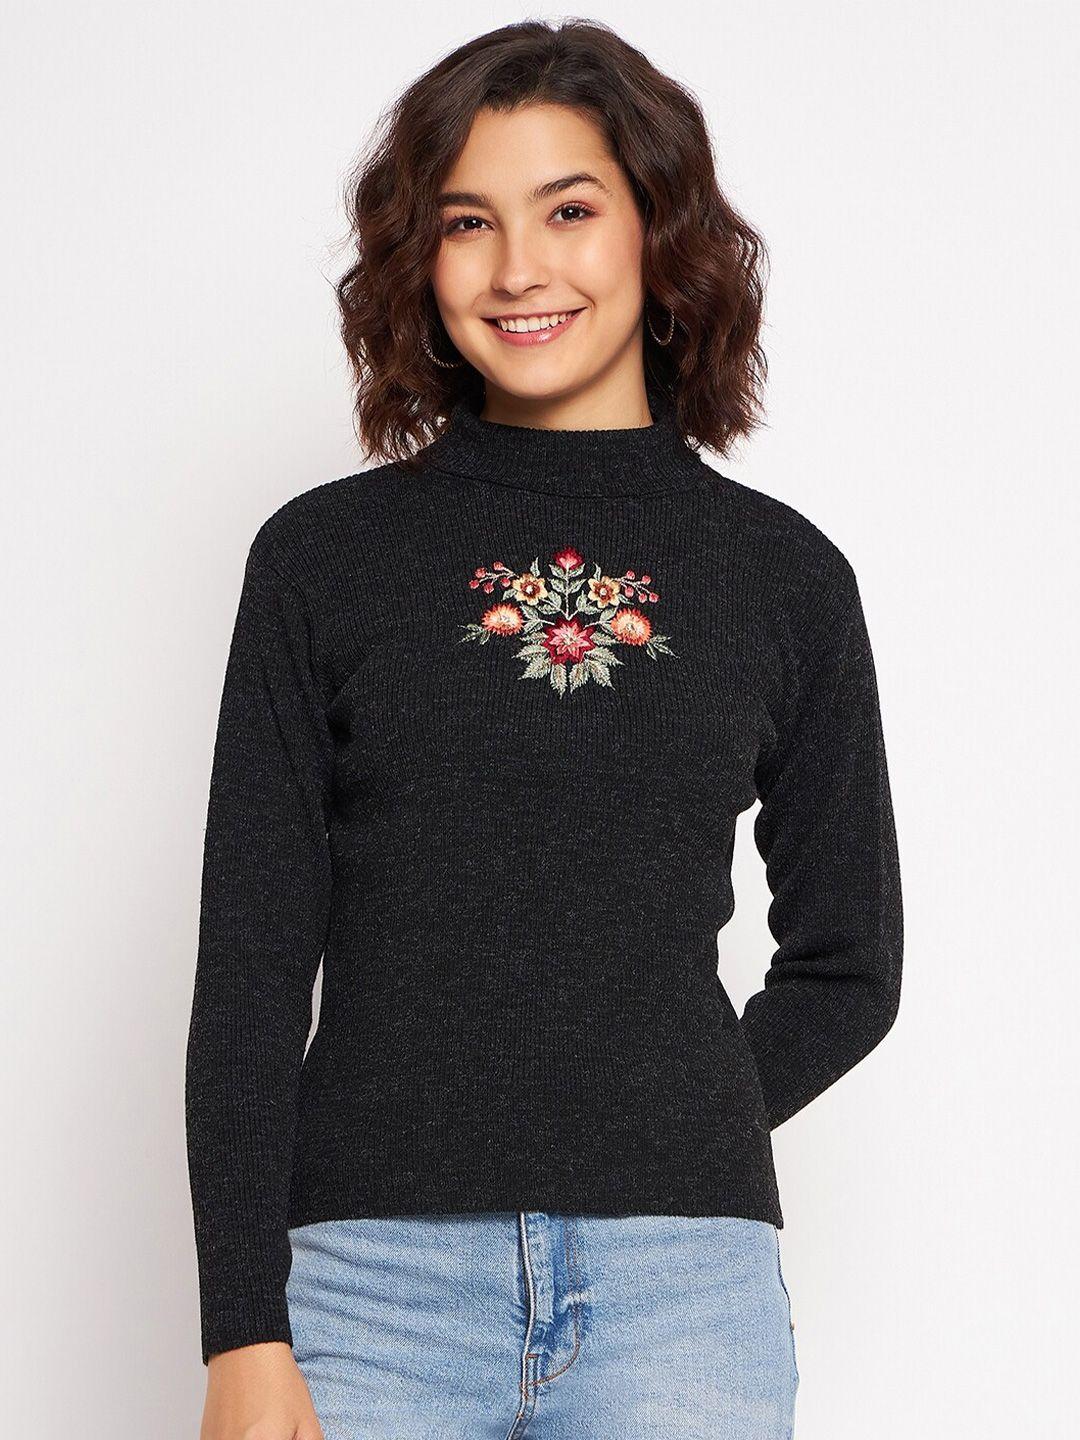 clapton-floral-embroidered-mock-collar-pullover-sweater